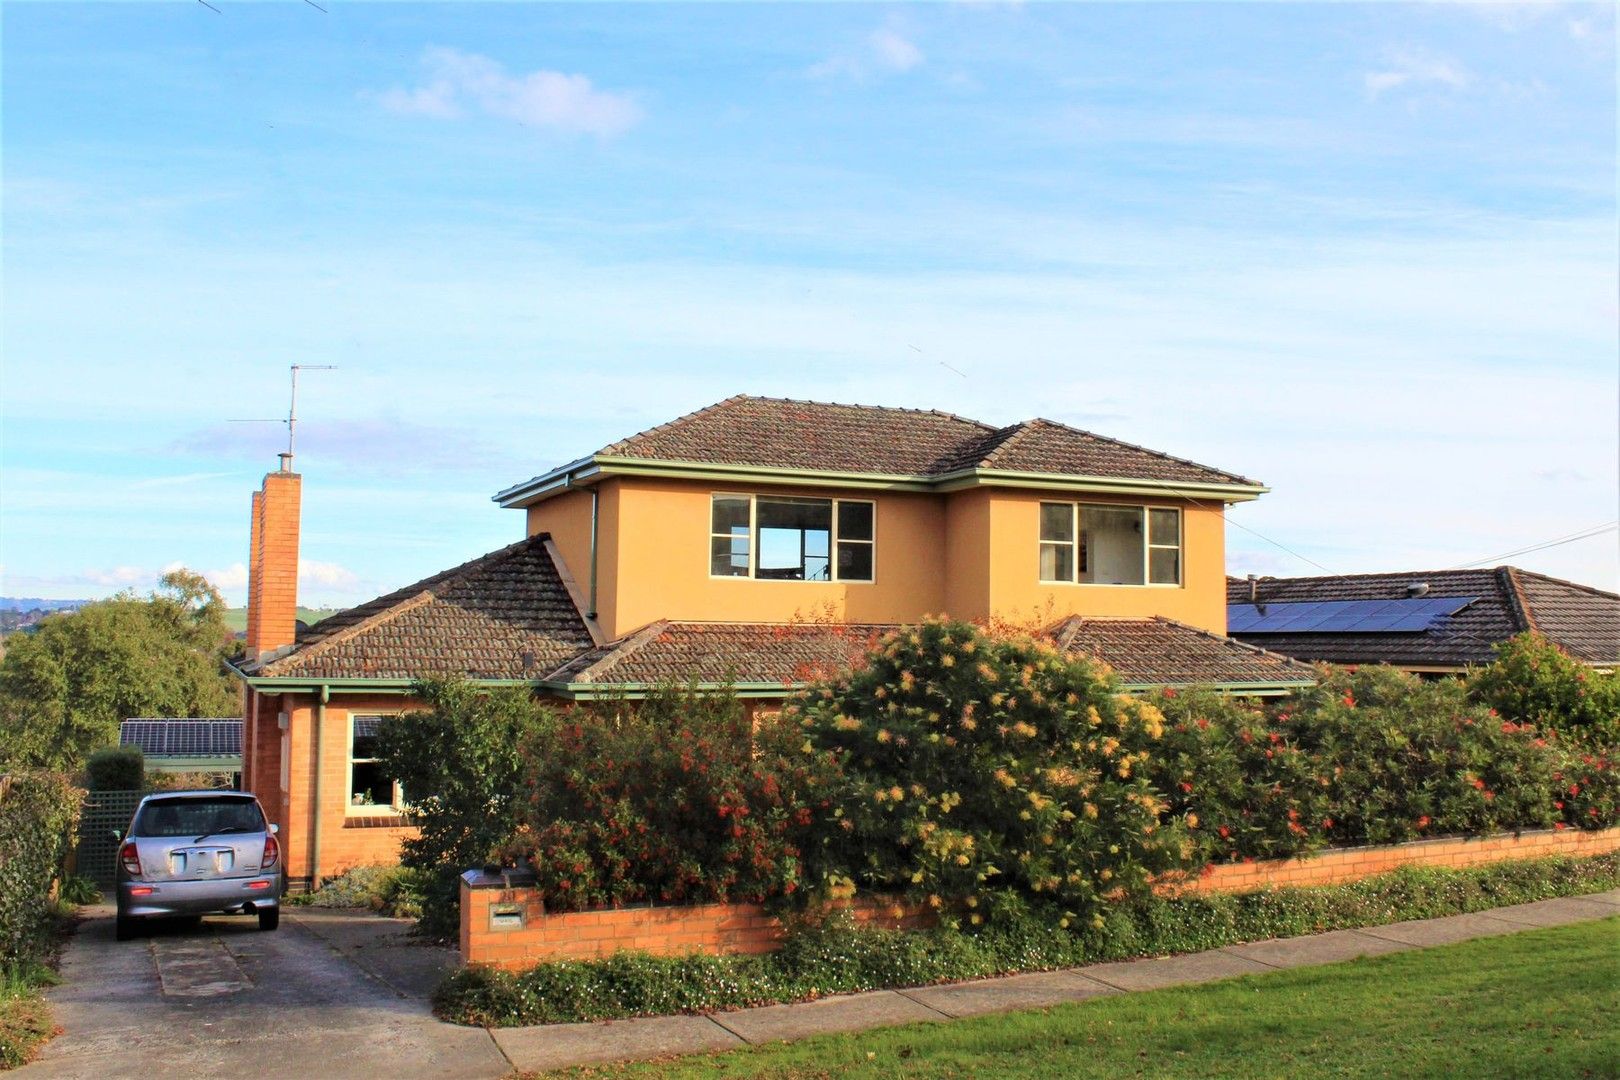 4 bedrooms House in 20 O'Dowds Road WARRAGUL VIC, 3820